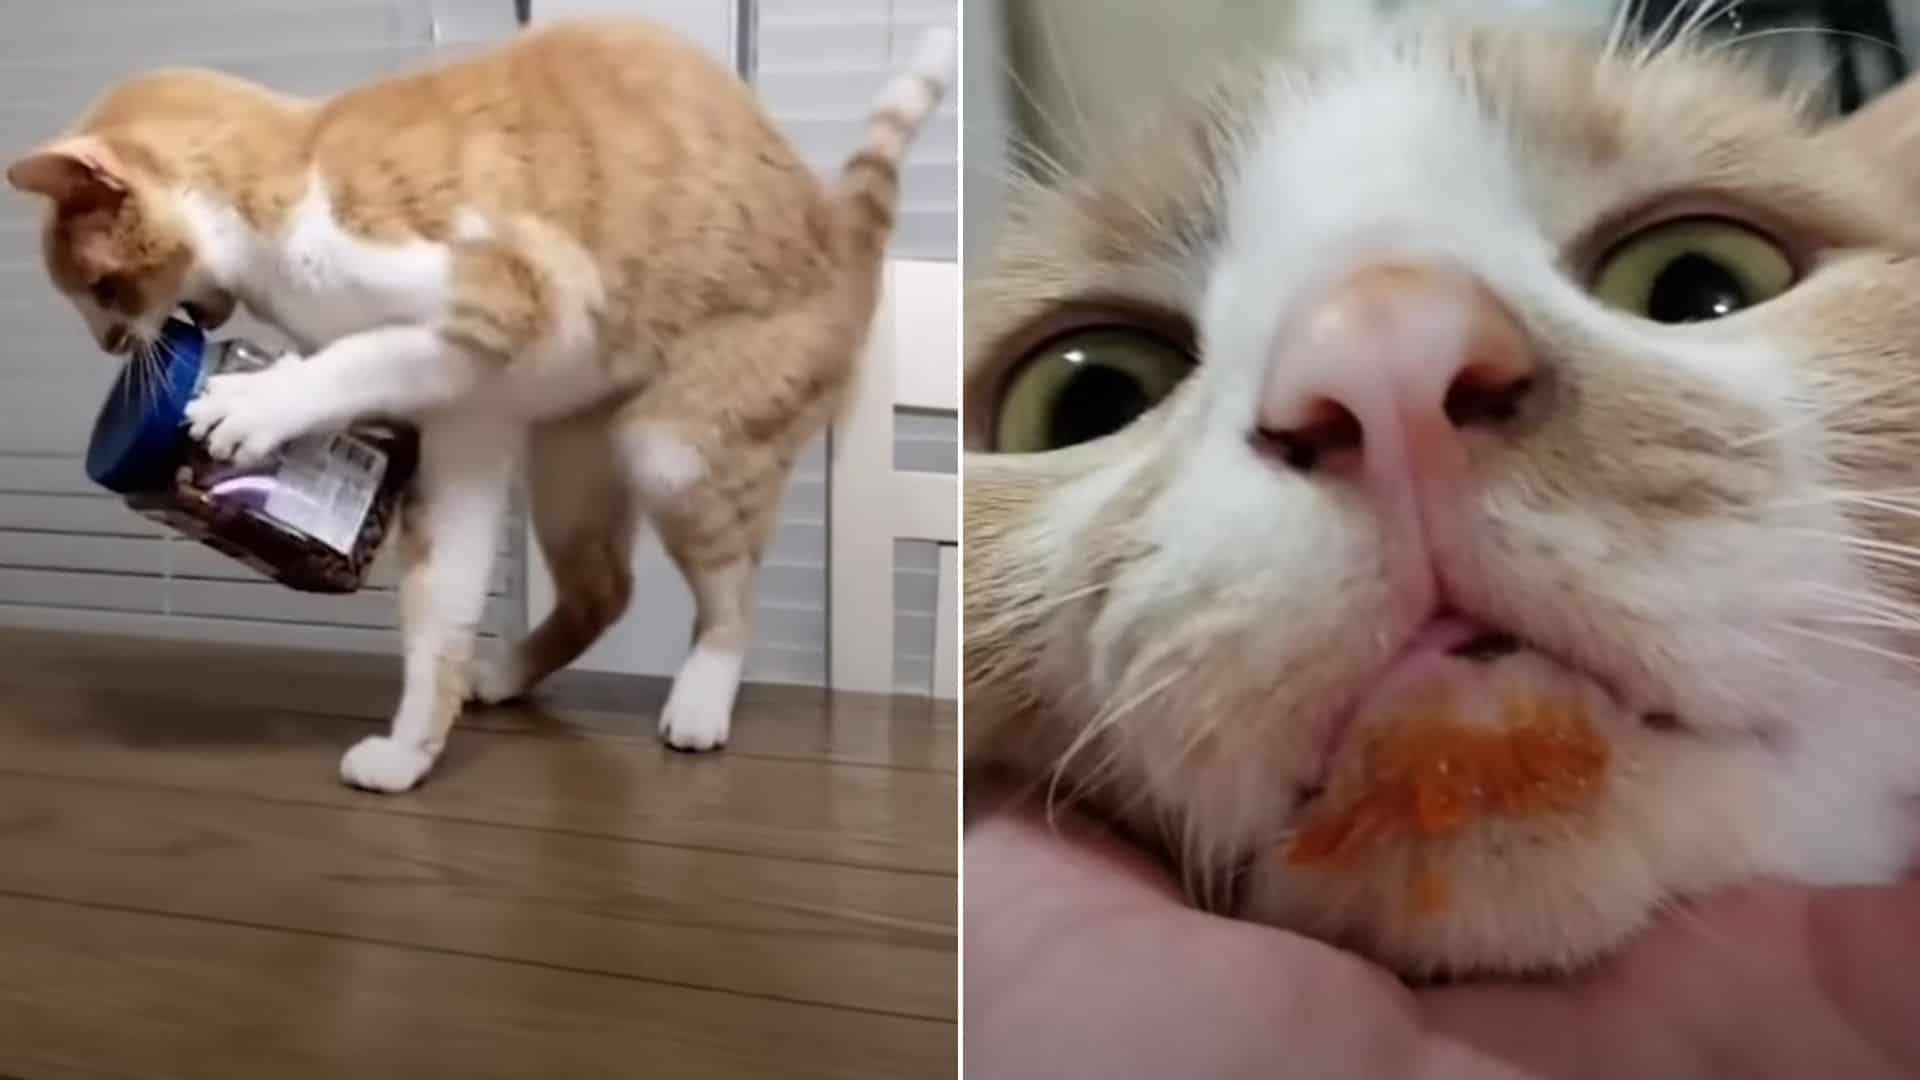 full photo and close-up of Trekkie the cat obsessed with food